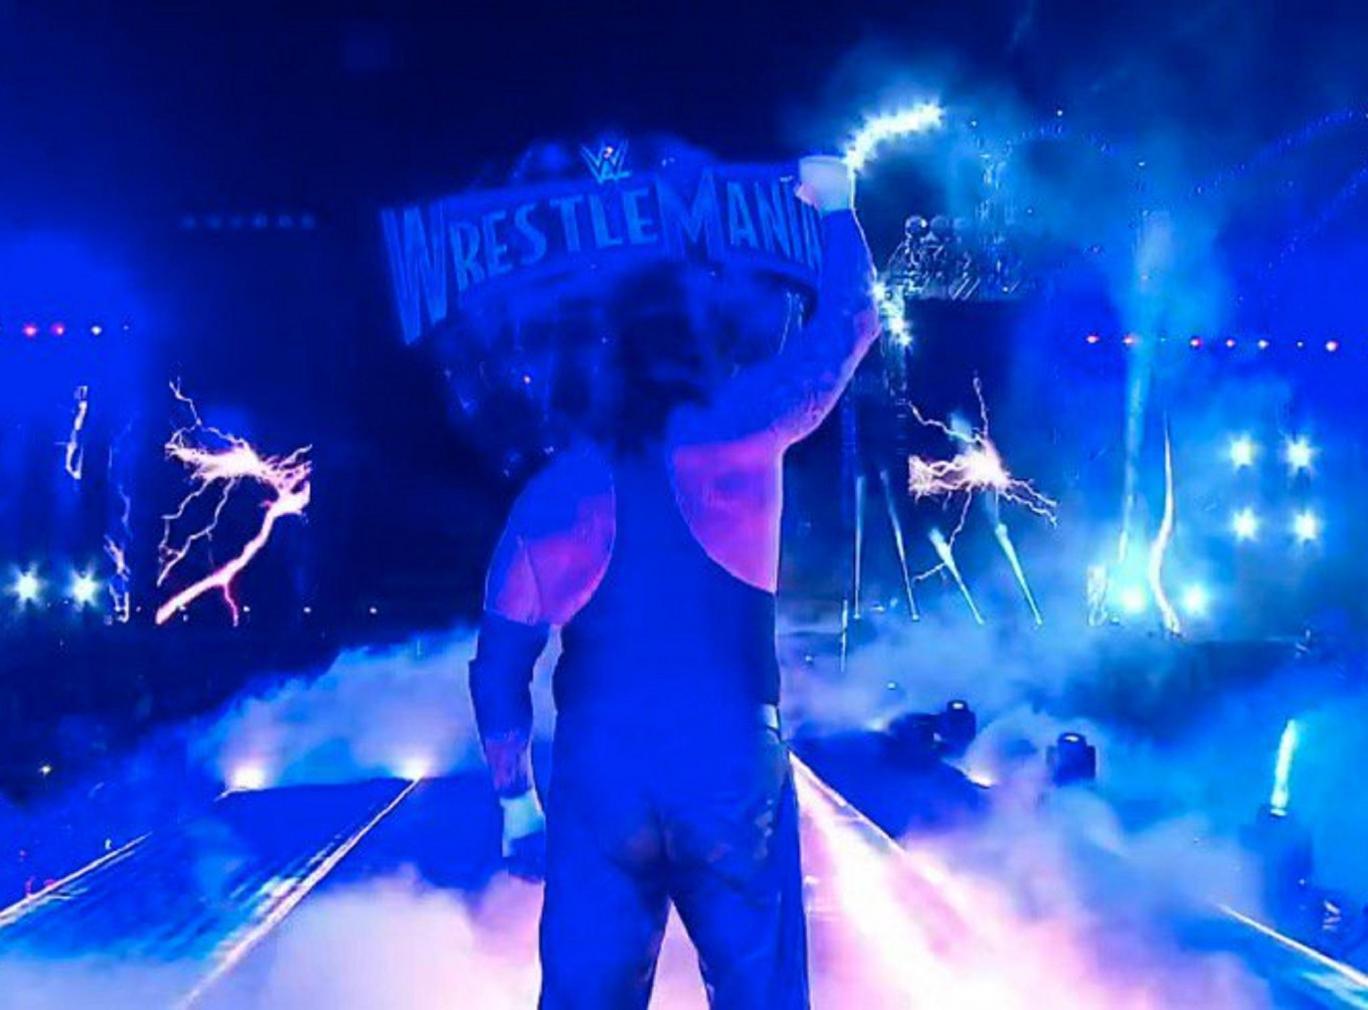 WrestleMania 33 results: The Undertaker breaks character, hugs his wife then retires after Roman Reigns defeat